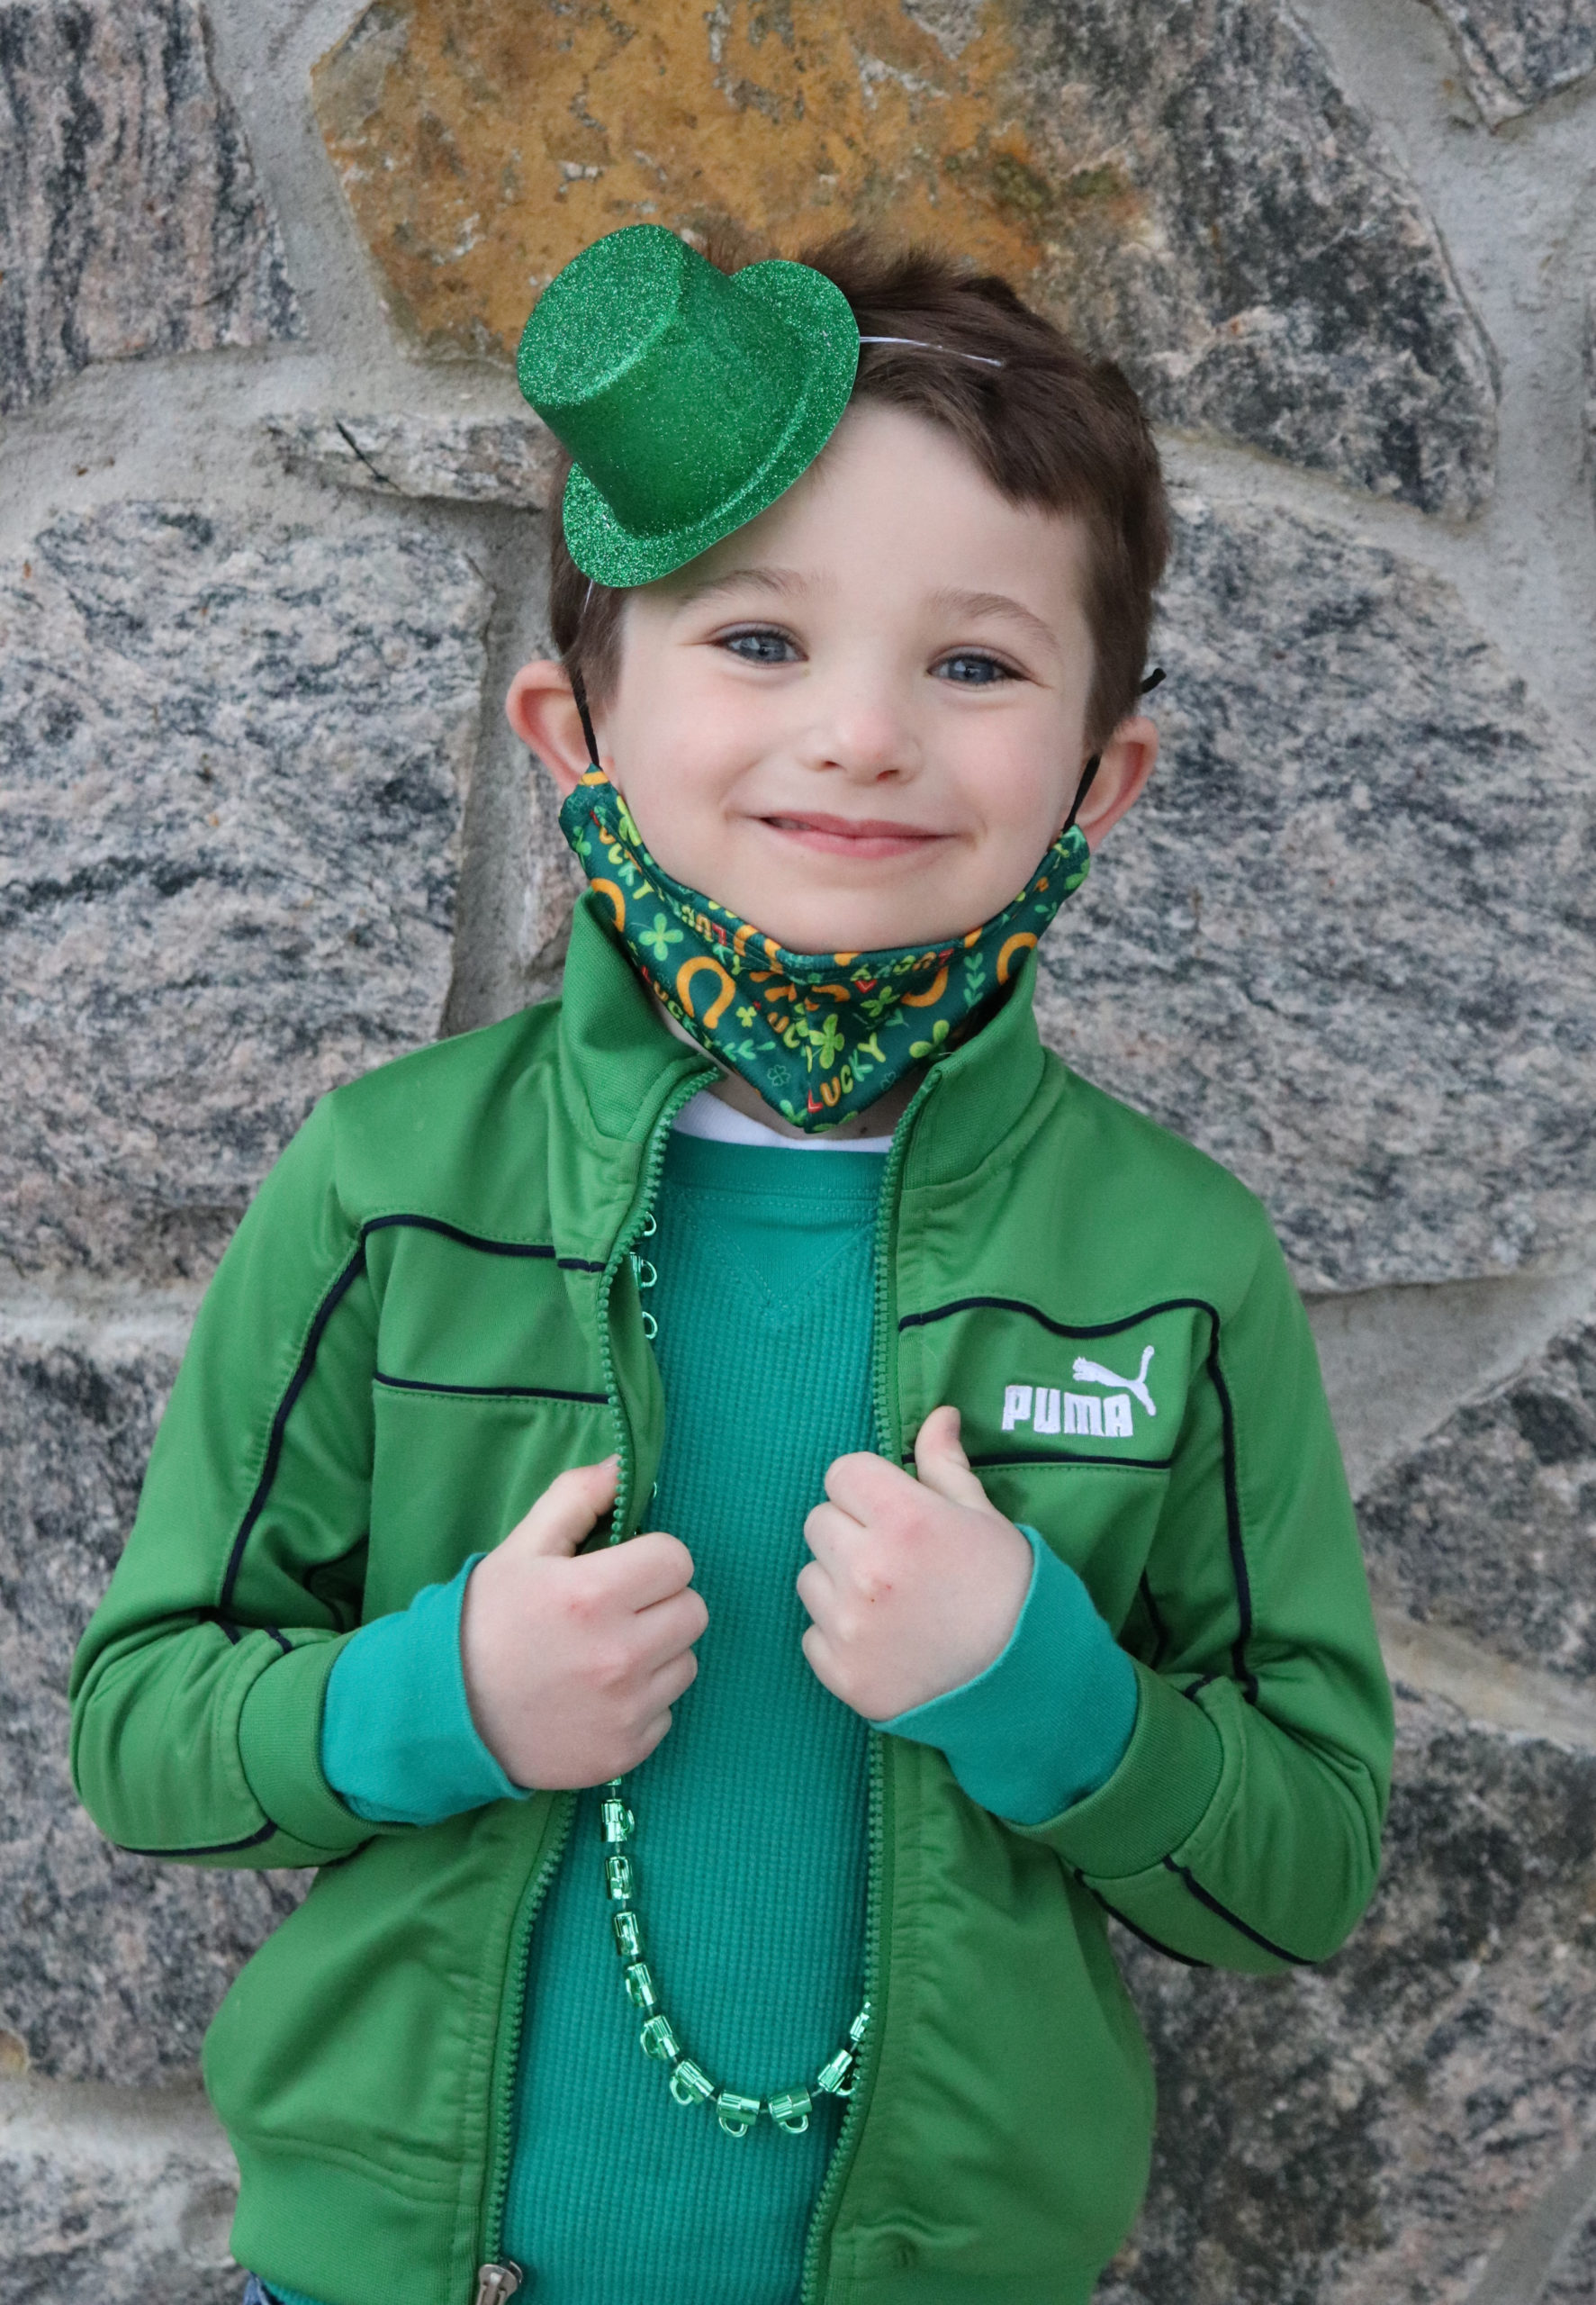 First-grade student, Christopher Lynch, prepares for Raynor Country Day School's first annual Leprechaun Leap.
COURTESY RAYNOR COUNTRY DAY SCHOOL